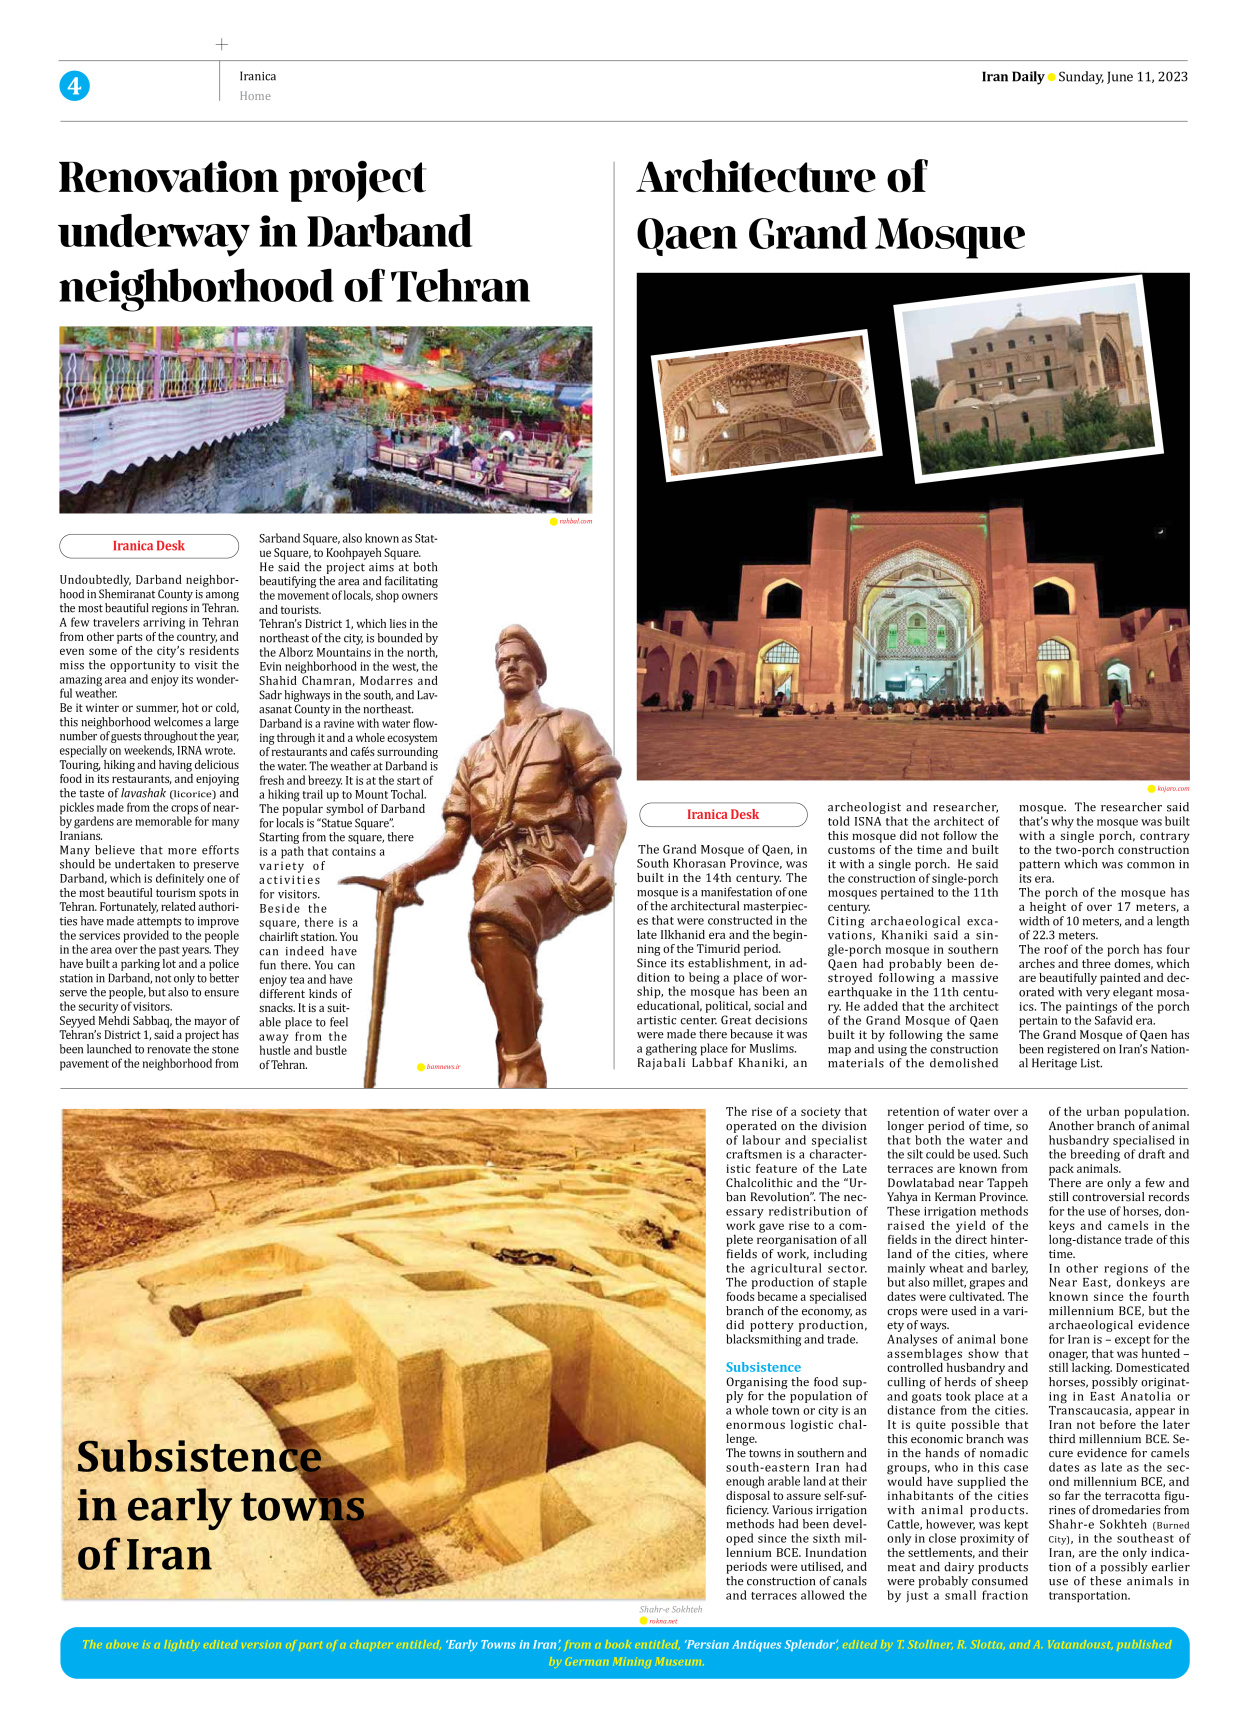 Iran Daily - Number Seven Thousand Three Hundred and Eleven - 11 June 2023 - Page 4